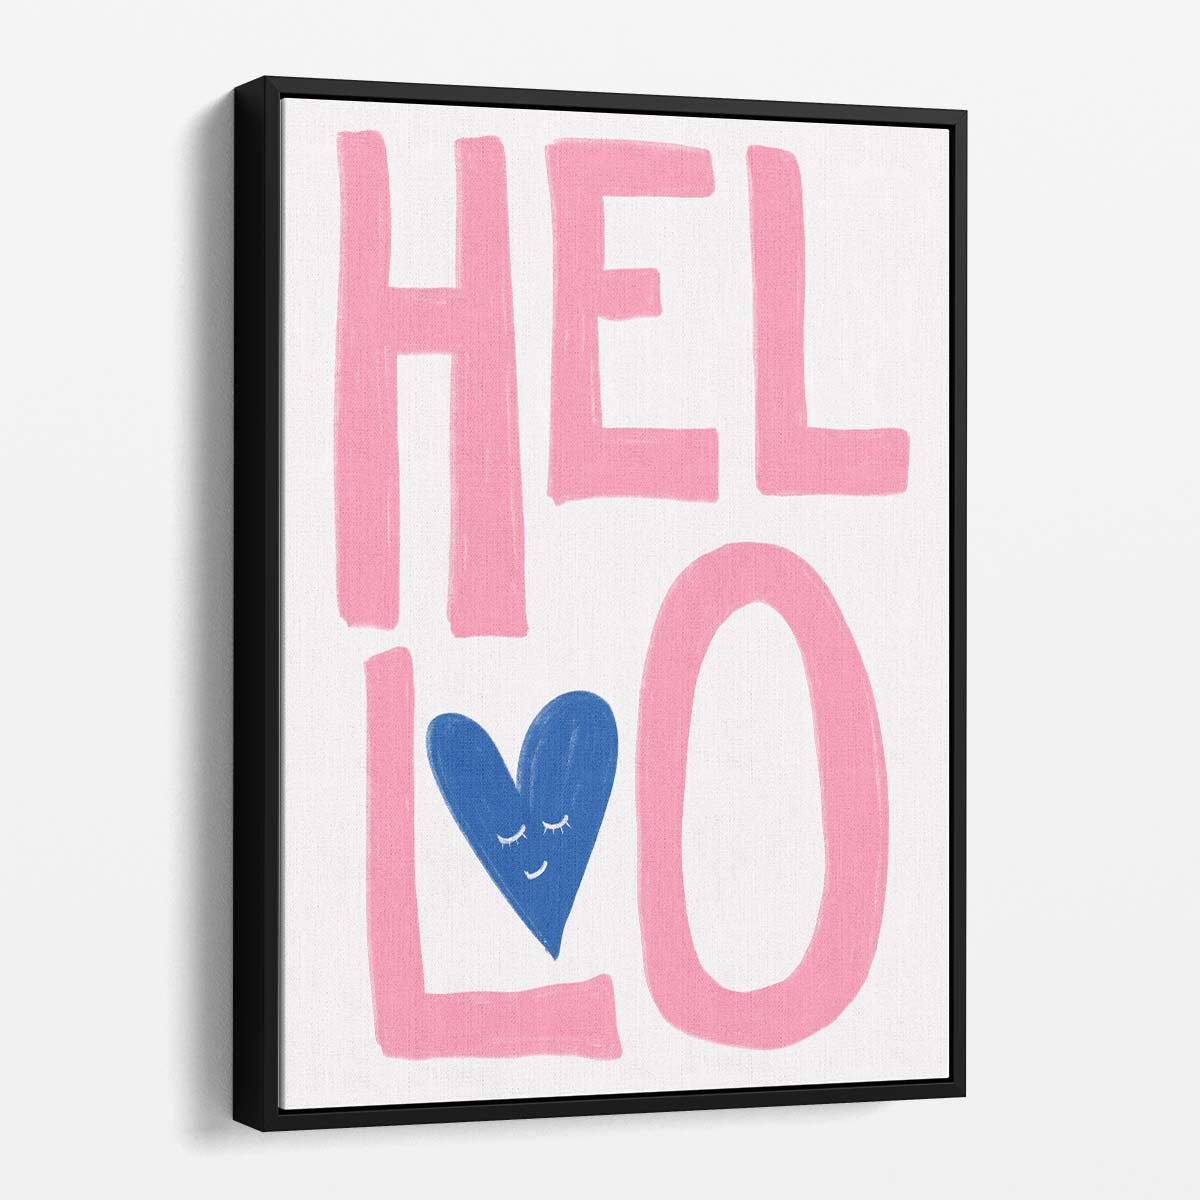 Inspirational Pink and Blue Heart Typography Illustration Wall Art by Luxuriance Designs, made in USA